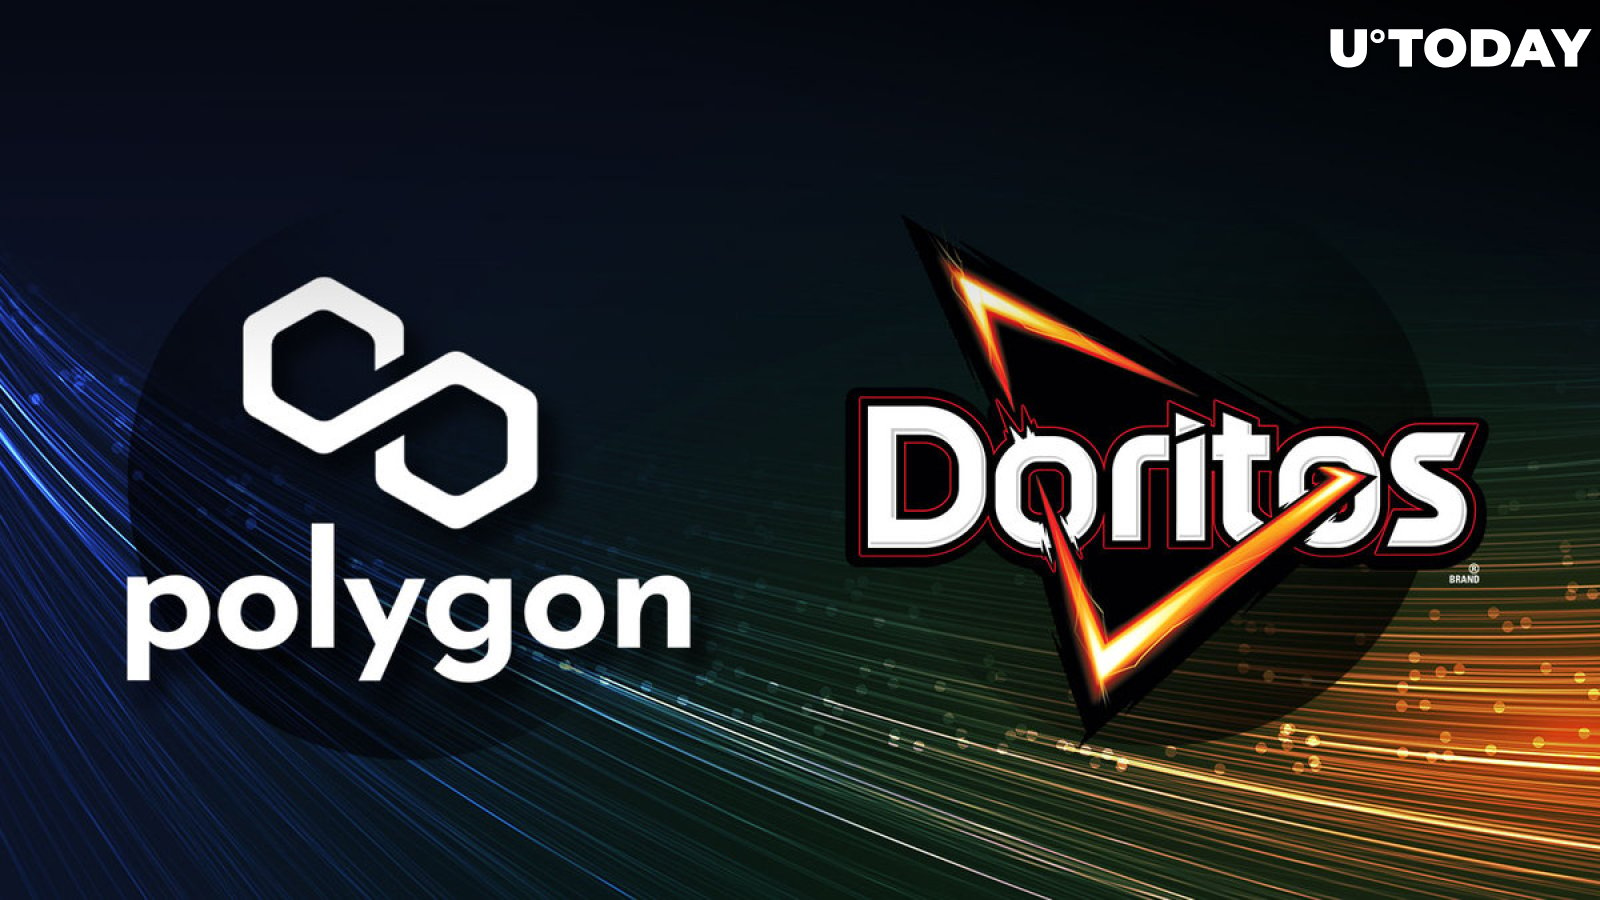 Doritos Chips Producer Comes to Polygon (MATIC), Here's How